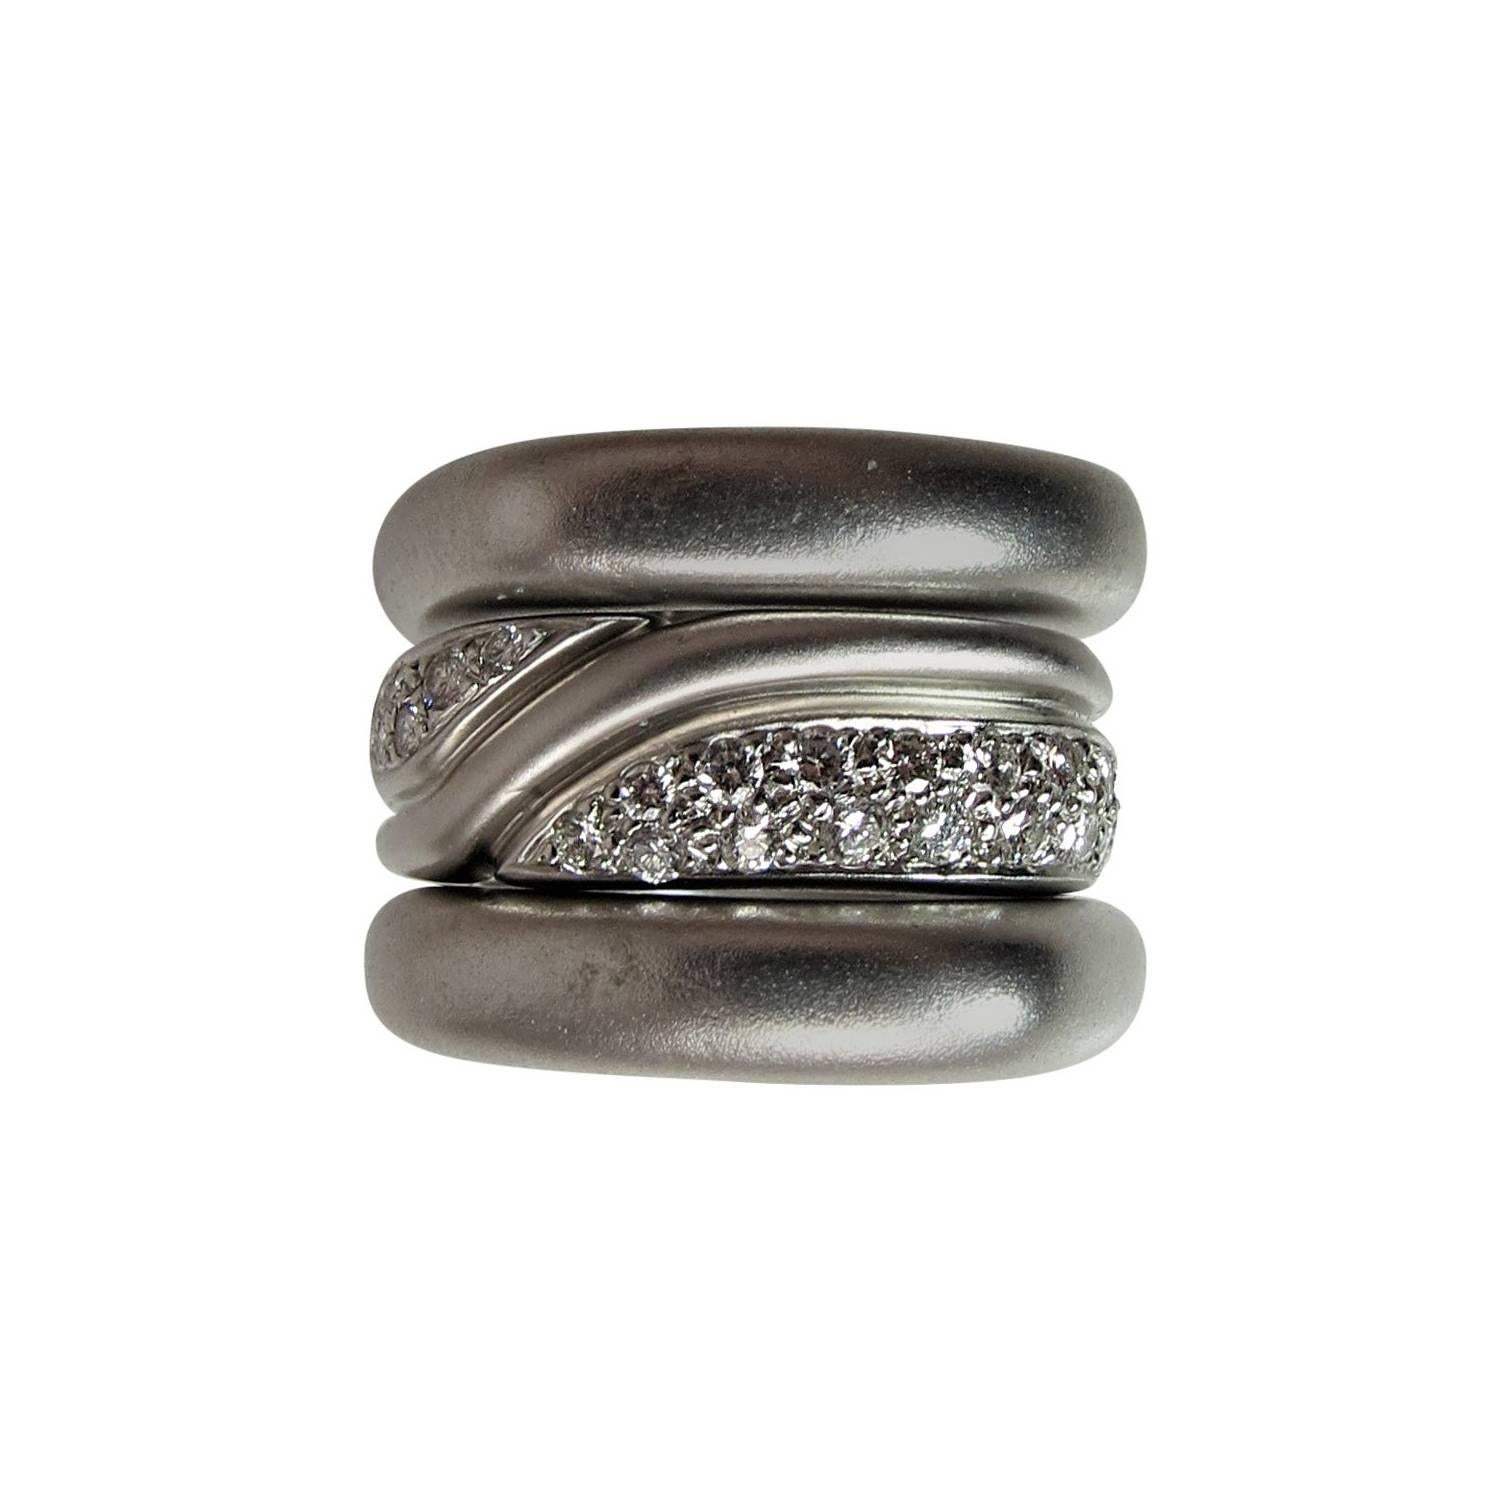 Marlene Stowe Set of Three White Gold and Diamond Stacking Band Rings For Sale